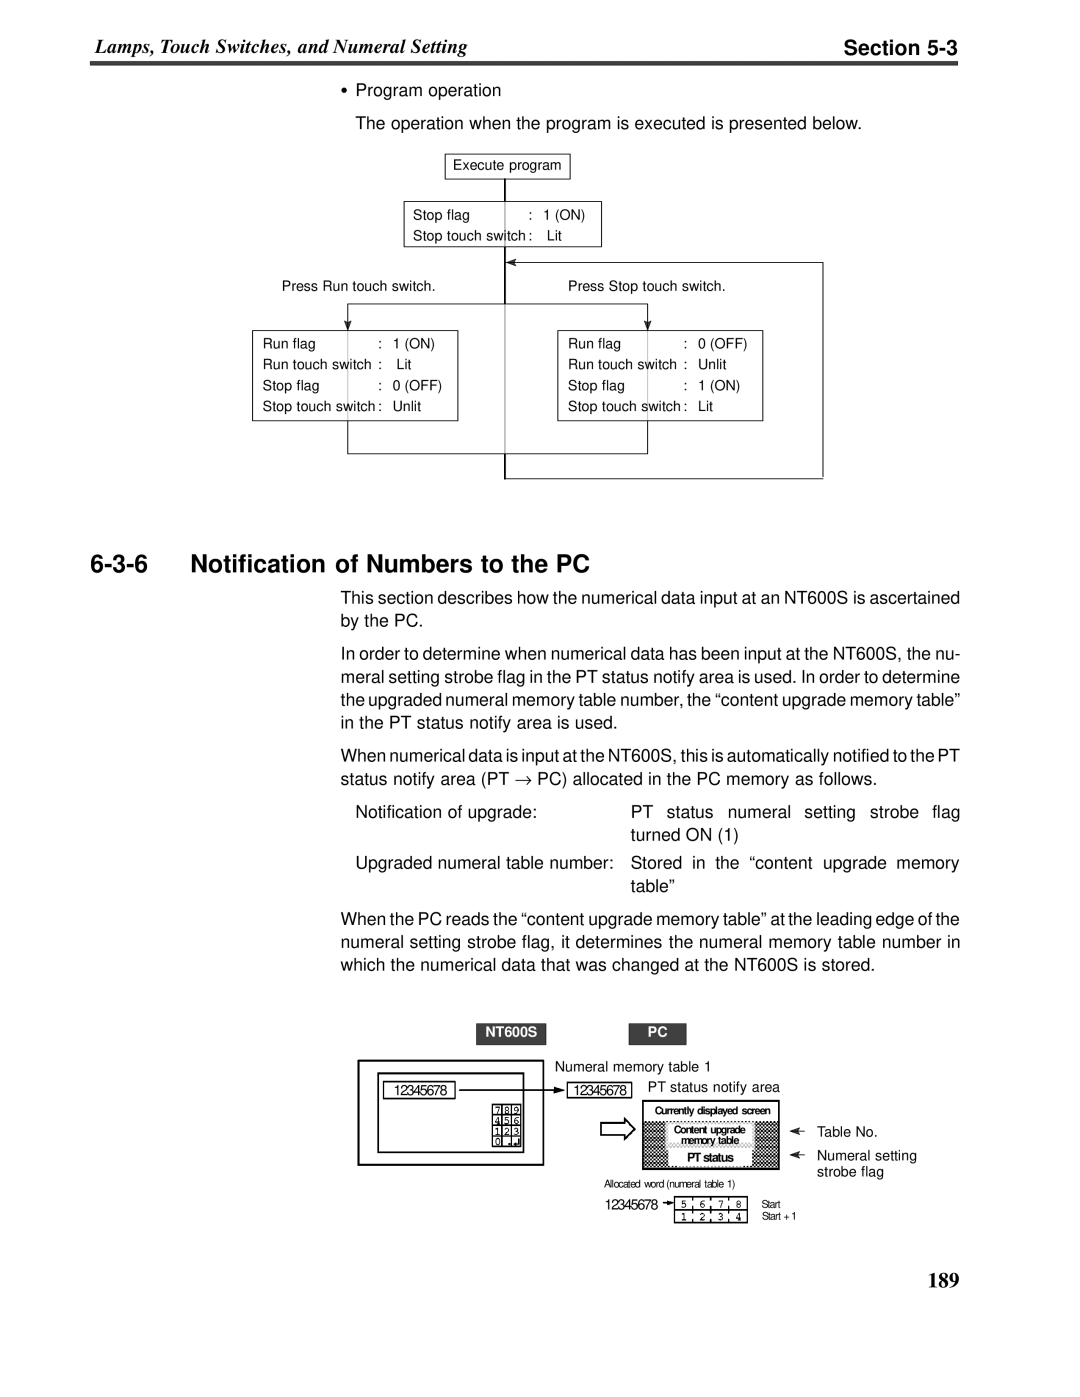 Omron V022-E3-1 operation manual 6-3-6Notification of Numbers to the PC, Section 